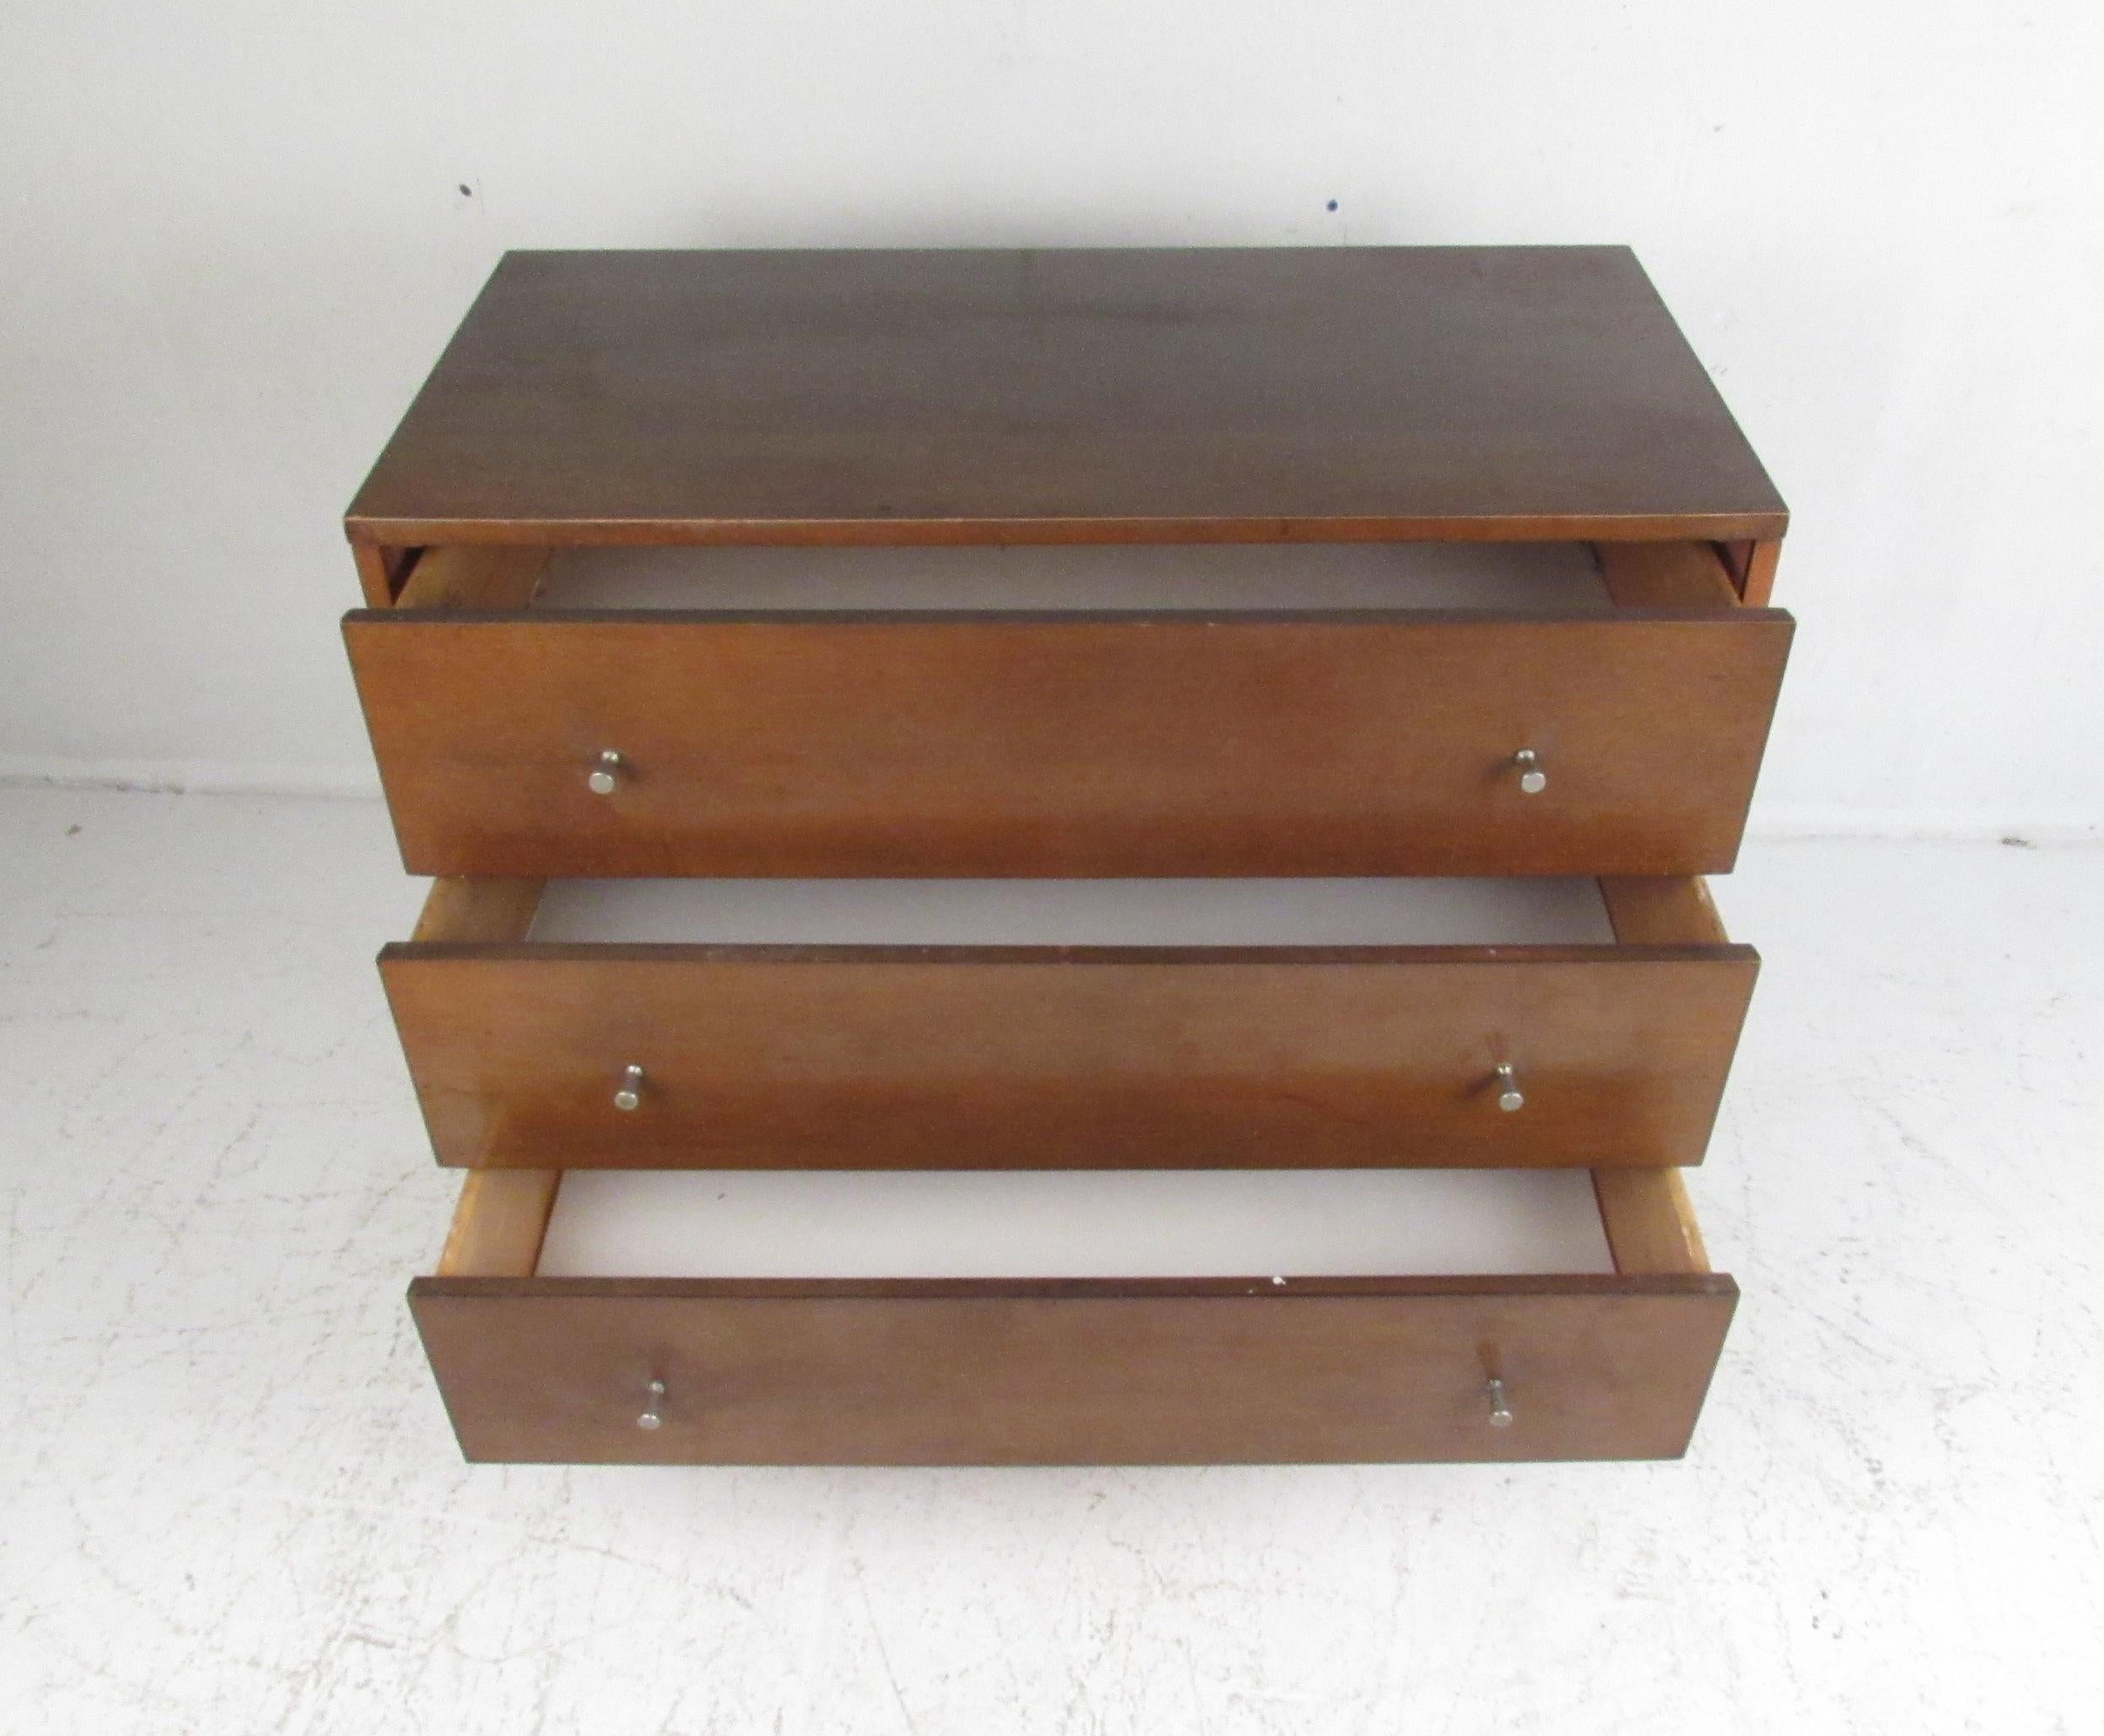 This beautiful vintage modern chest features three large drawers with metal conical pulls on each. Straight line midcentury design with tapered legs and a vintage walnut finish. This stylish dresser makes the perfect addition to any modern interior.